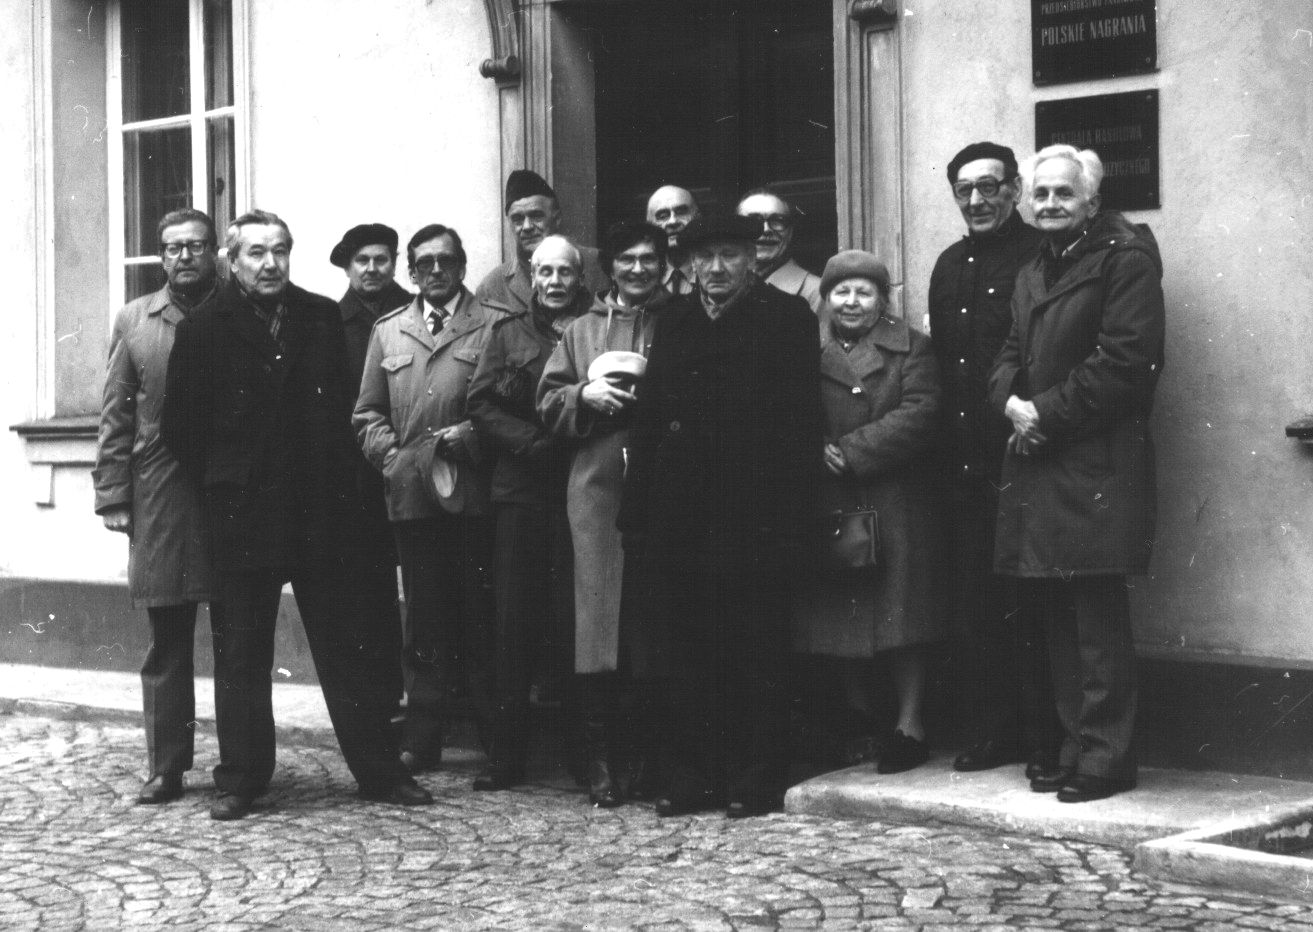 Meeting of Warsaw Rising 1944 fighters - April 20th, 1986